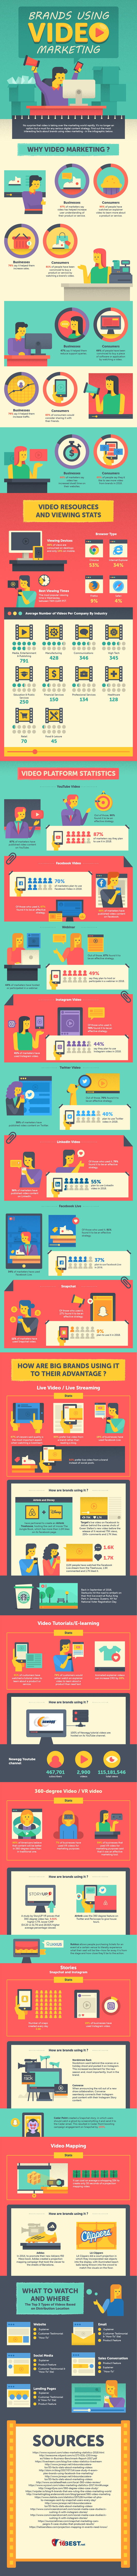 Brands using Video Marketing [Infographic]